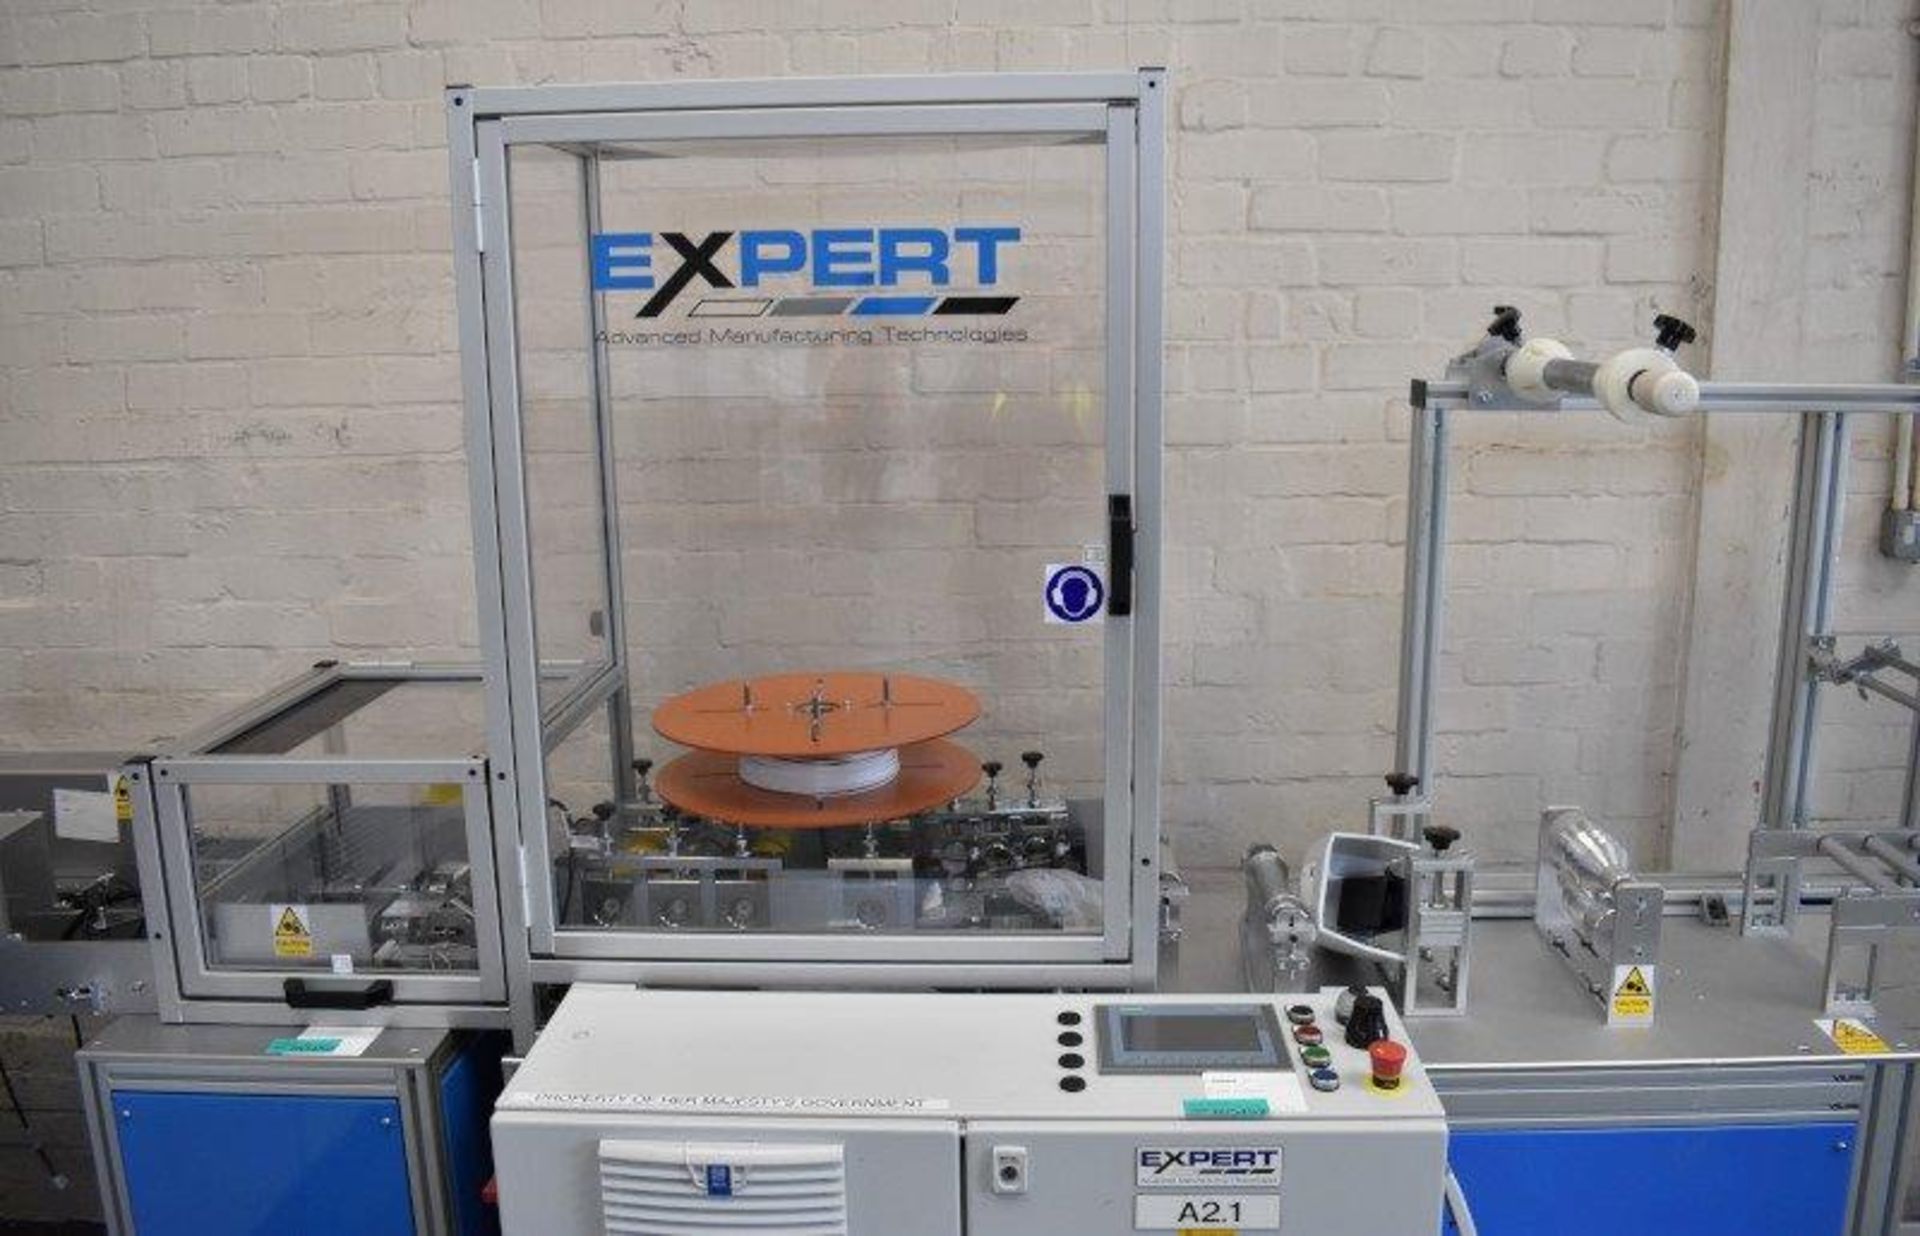 Expert fully automated Mask Making Machine - manufactured in 2020 - Image 5 of 21